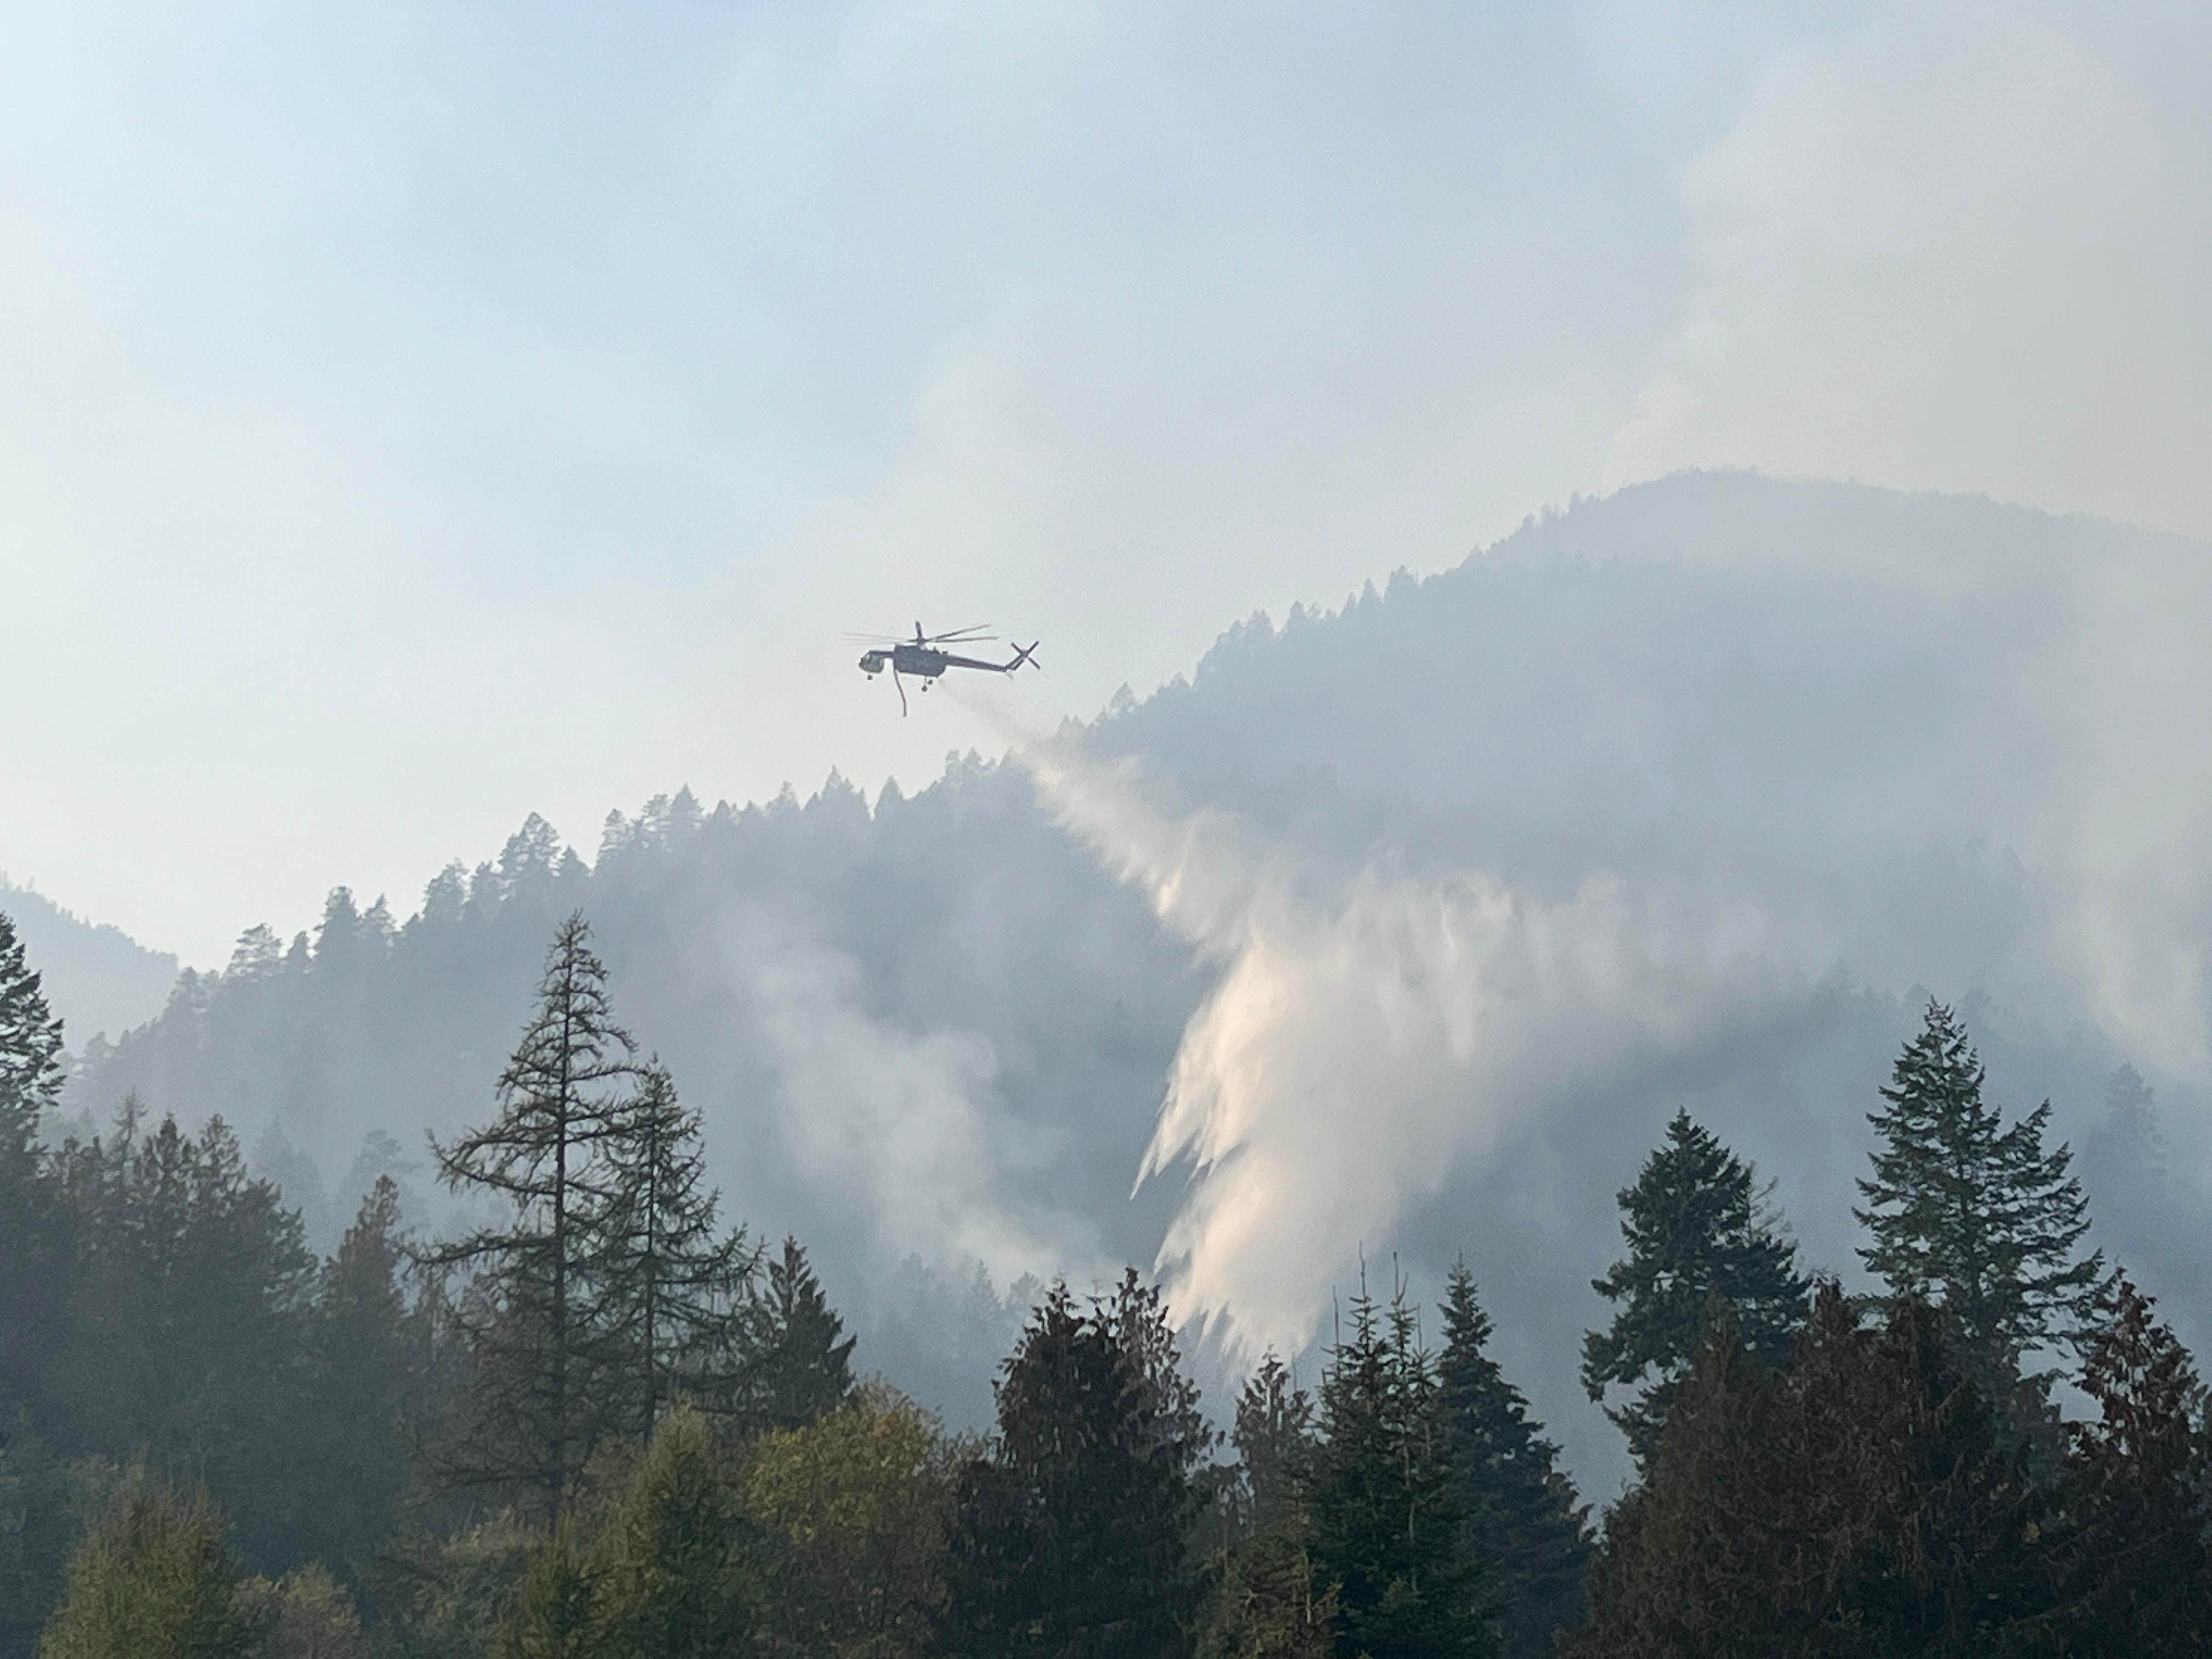 Kootenai River Complex Fire Near Bonners Ferry Idaho Current Incident Information And 0748